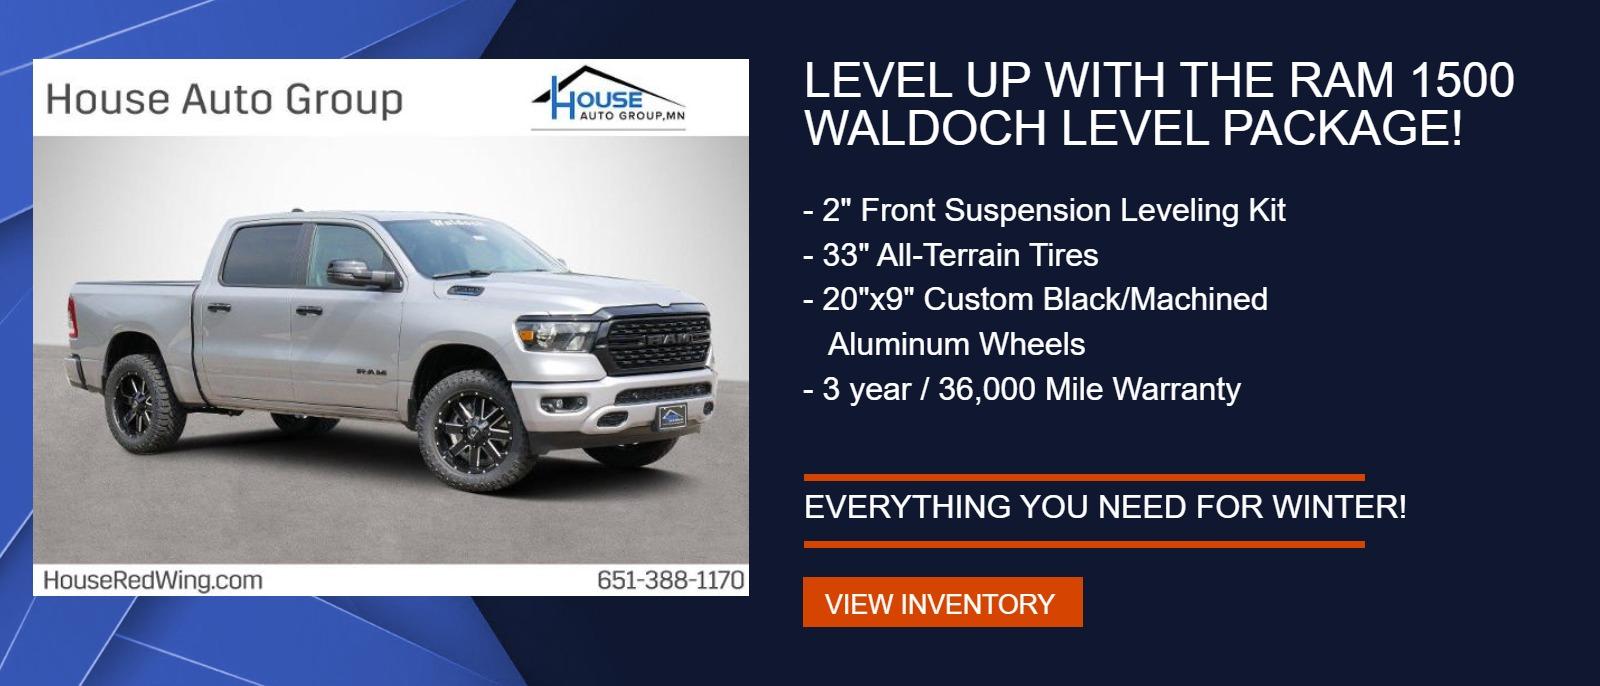 LEVEL UP With the Ram 1500 WALDOCH Level Package!
o	2" Front Suspension Leveling Kit
o	33" All-Terrain Tires
o	20"x9" Custom Black/Machined Aluminum Wheels
o	3 year / 36,000 Mile Warranty